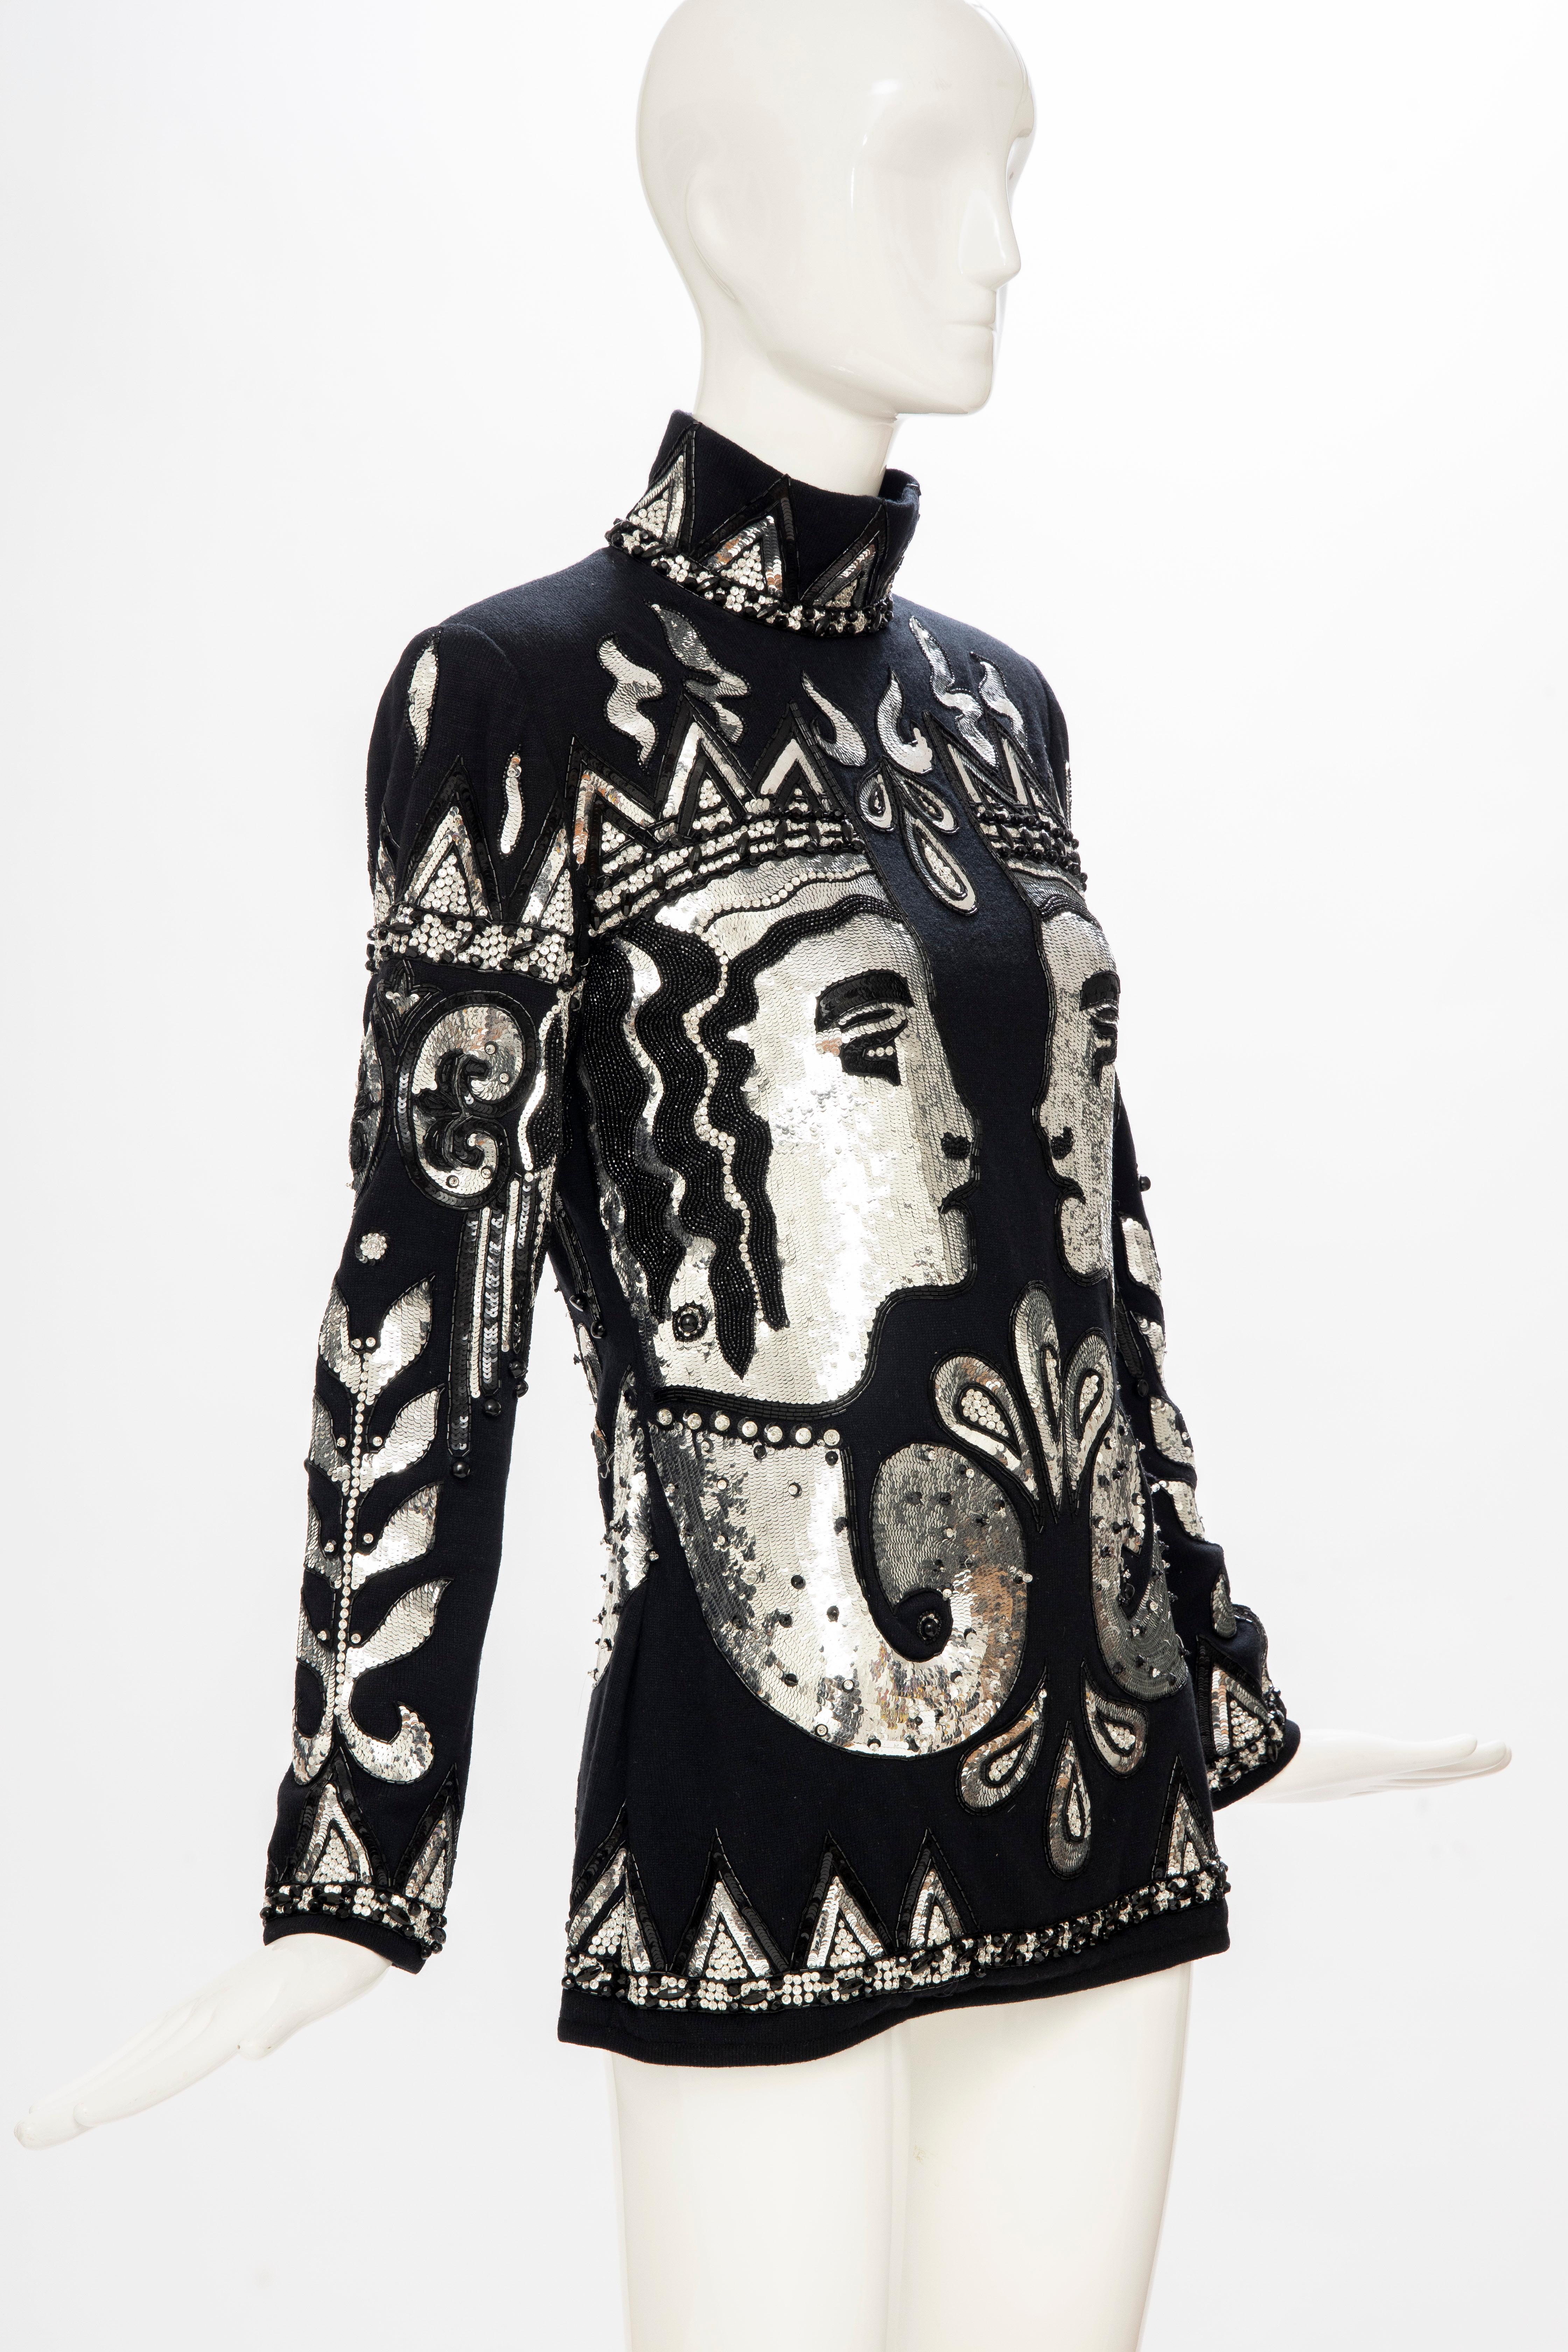 Women's Valentino Boutique Black Wool Embroidered Silver Sequins Sweater, Fall 1989-90